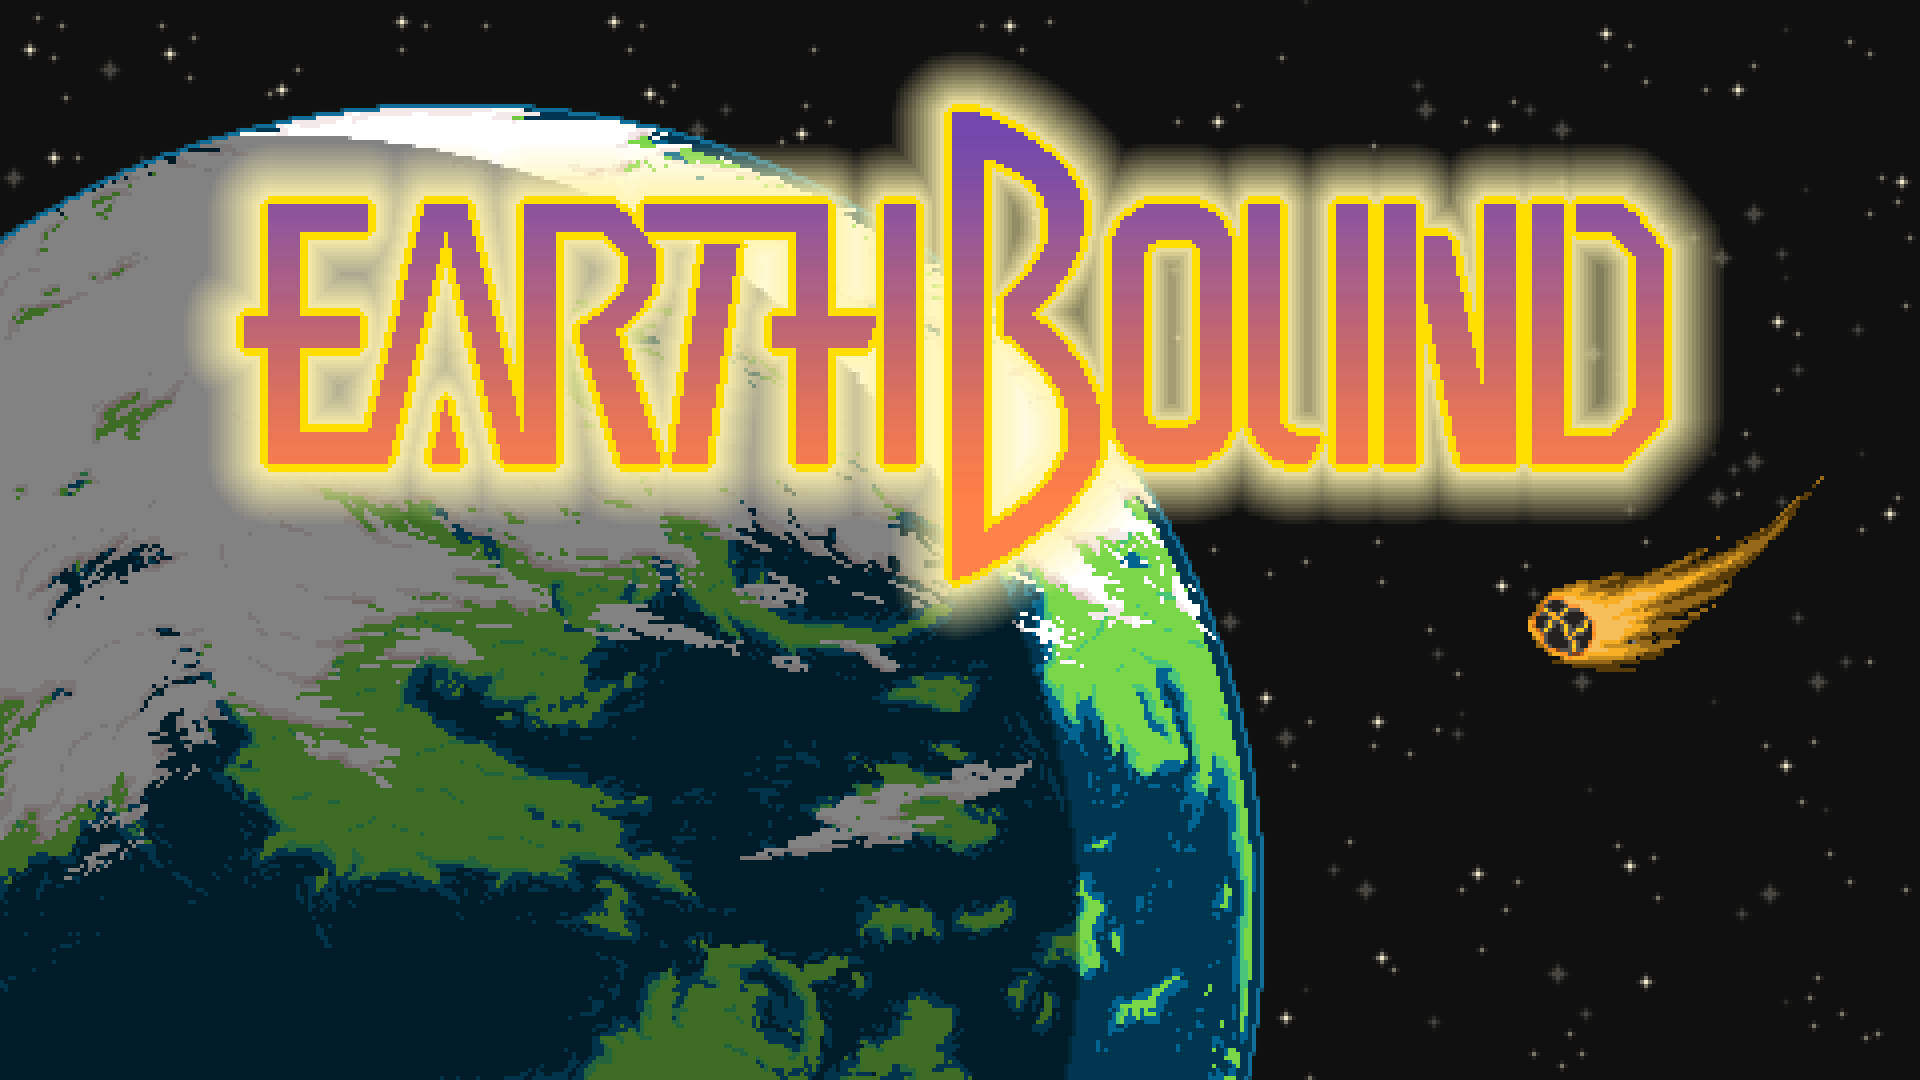 Earthbound 1920X1080 Wallpaper and Background Image